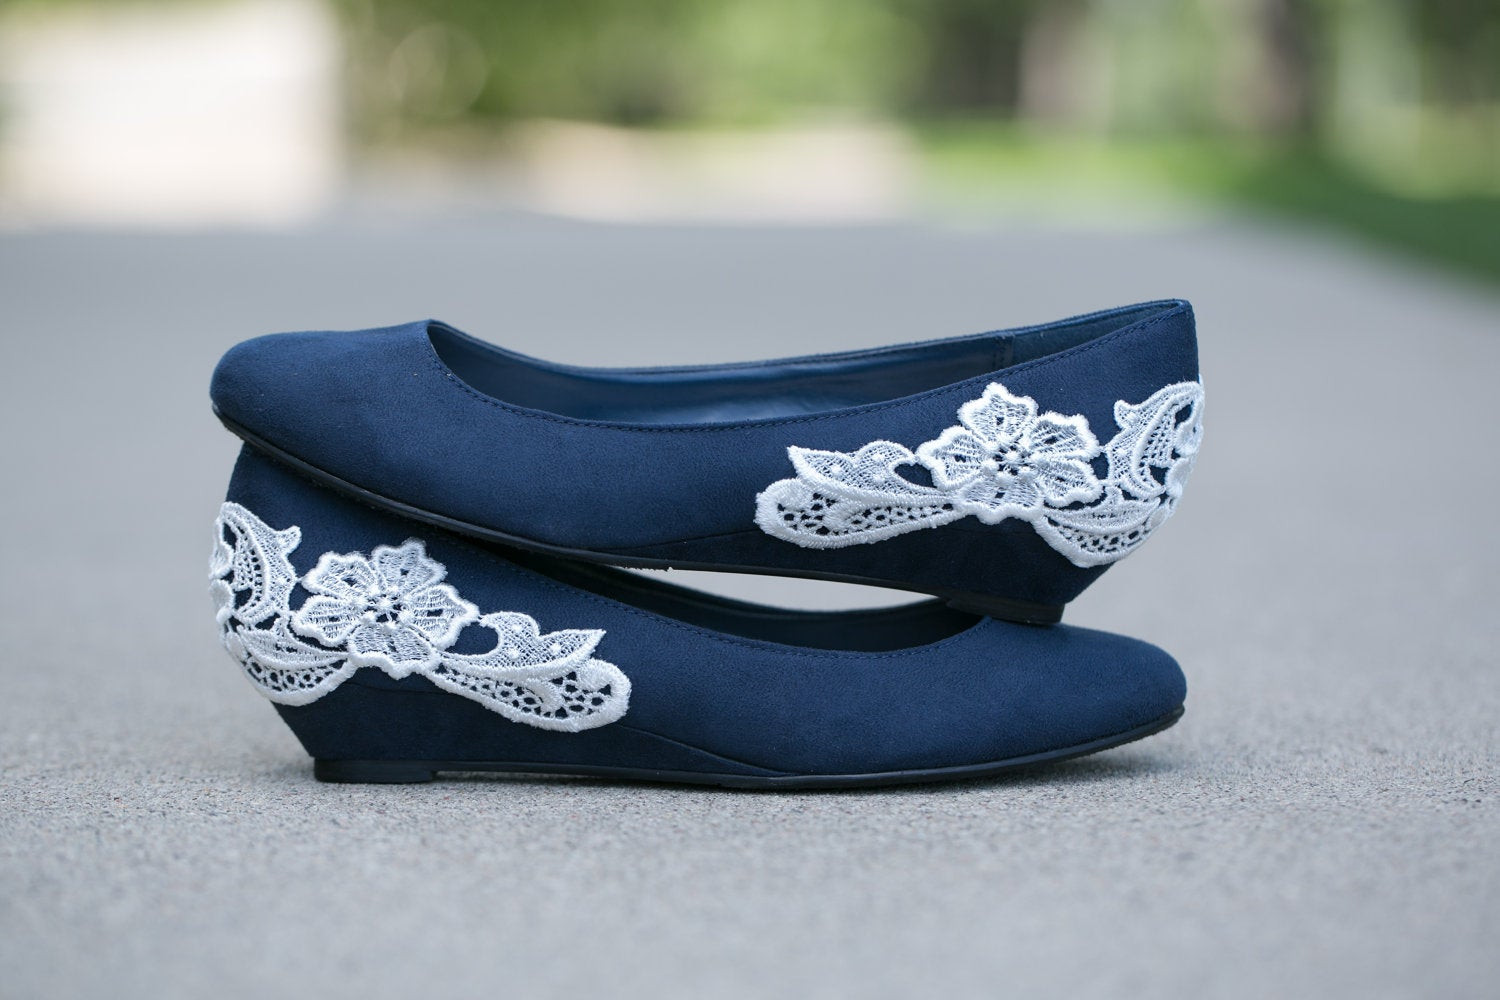 Blue Wedding Shoes For Bride
 Navy blue ballet flat low wedge wedding shoes with ivory lace